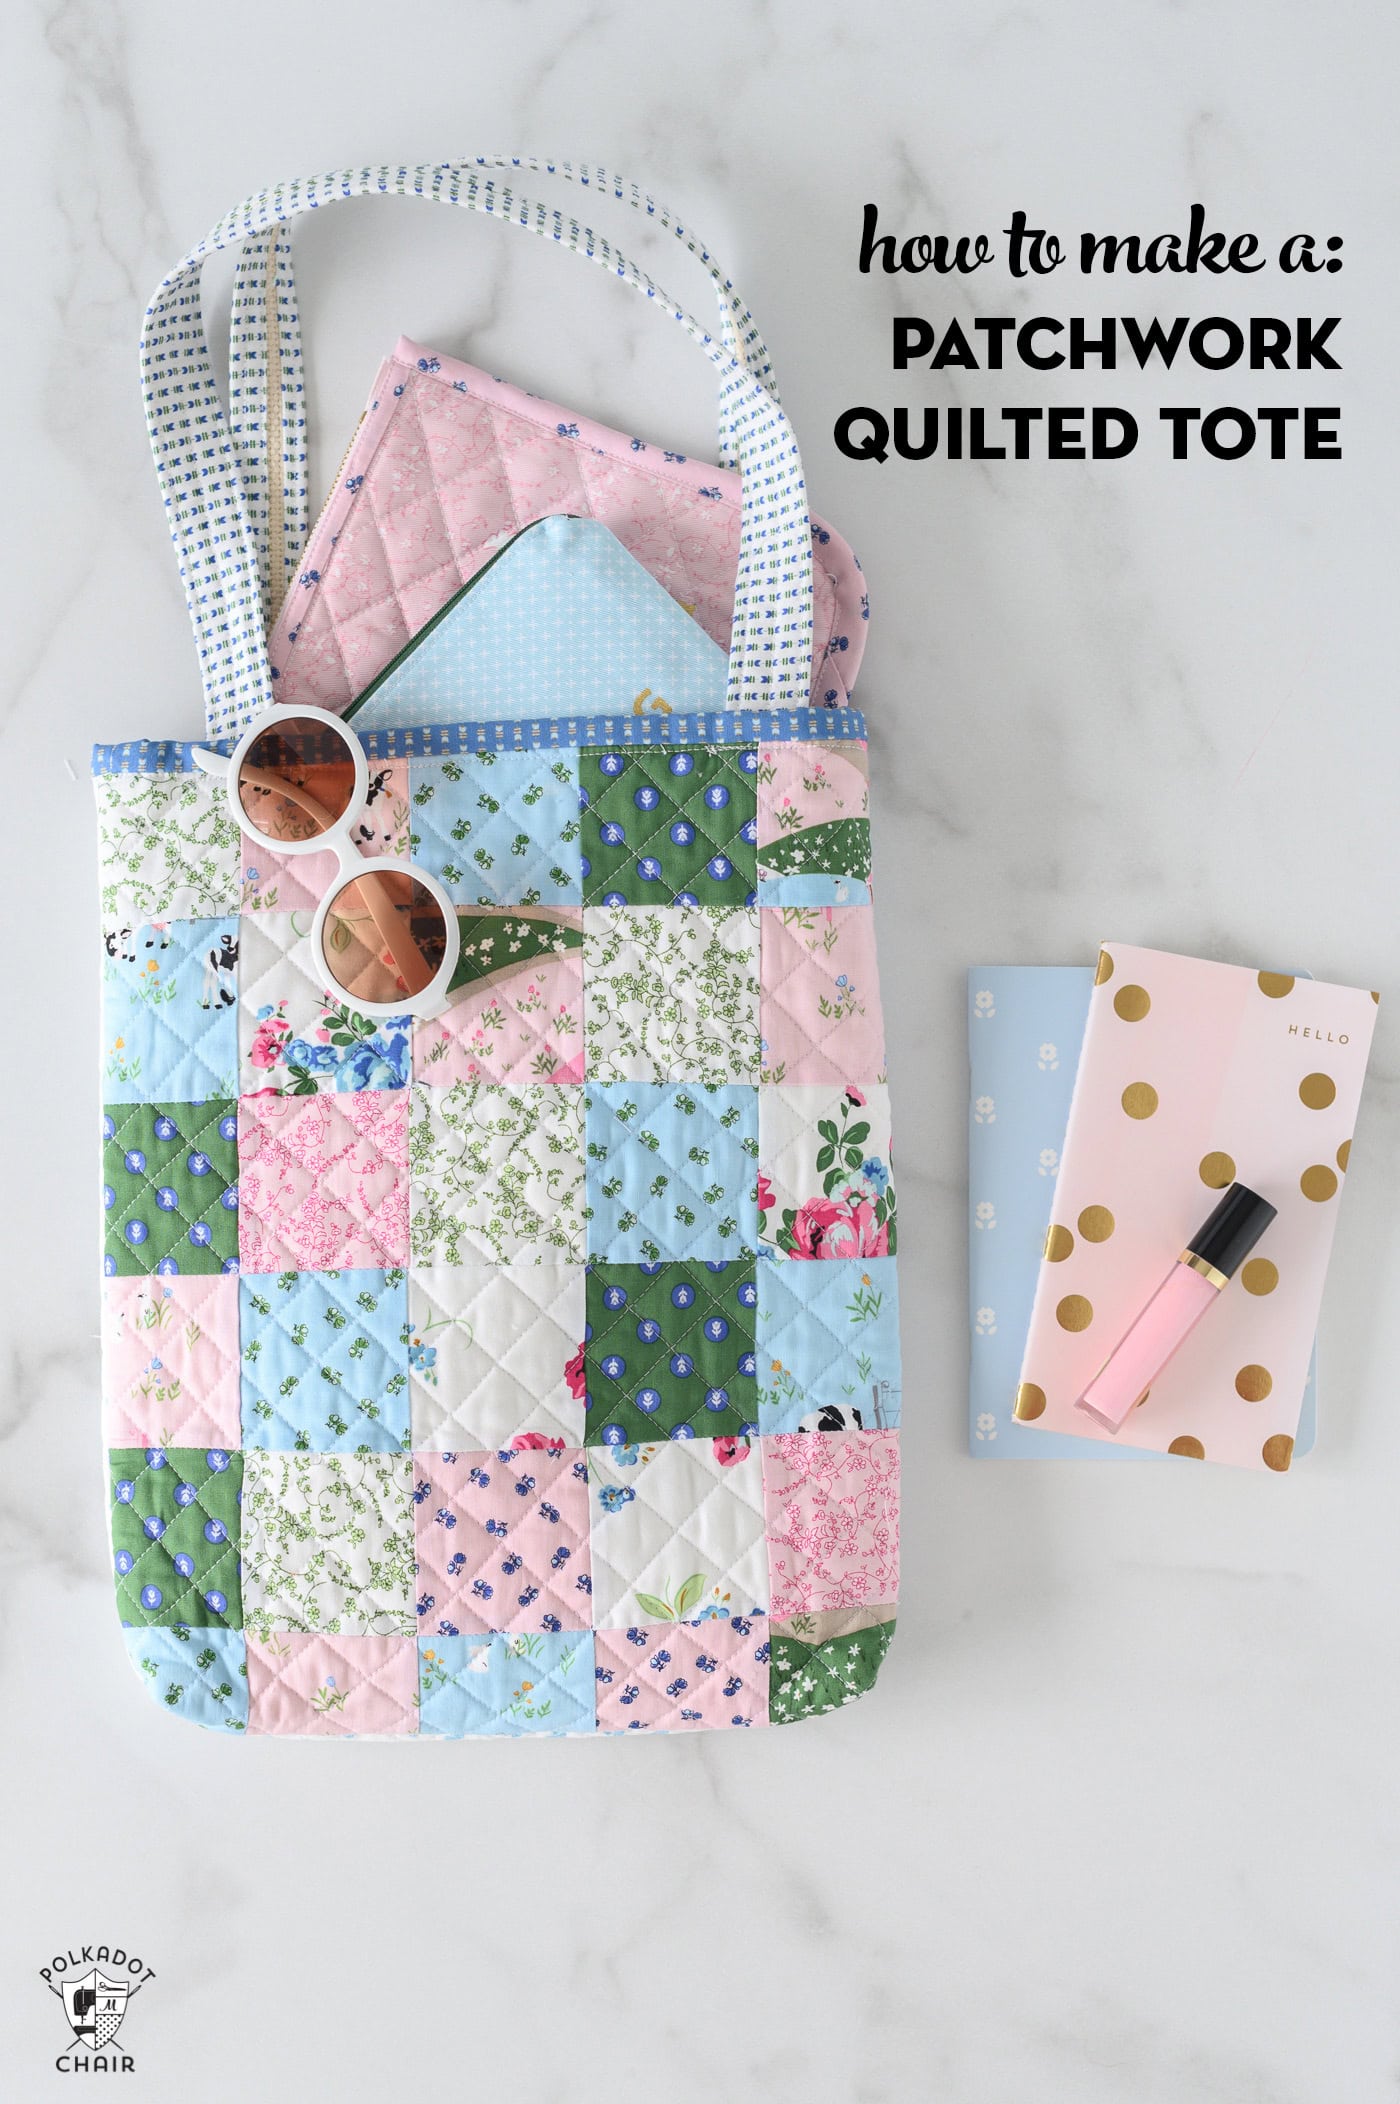 Use your Fabric Scraps to Make a Patchwork Quilted Tote Bag